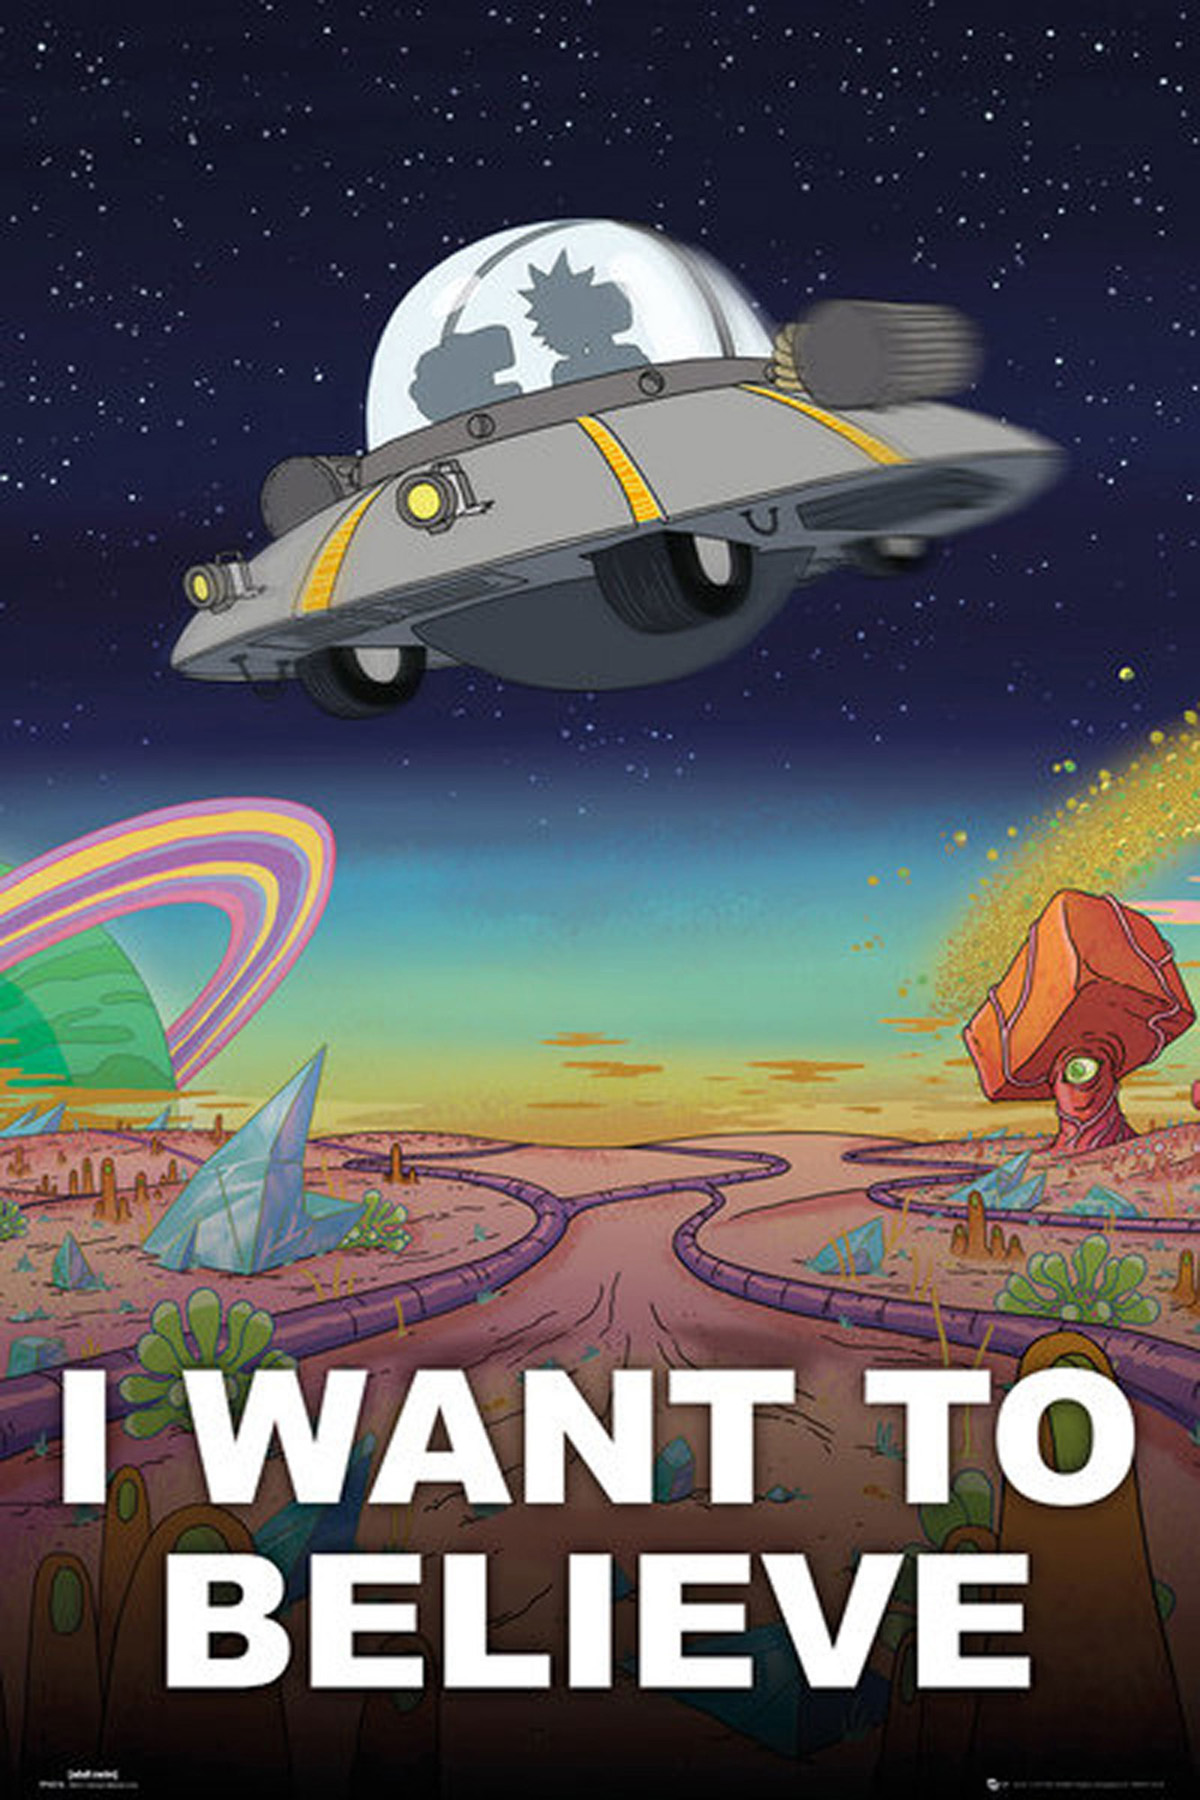 Rick & Morty - I Want To Believe